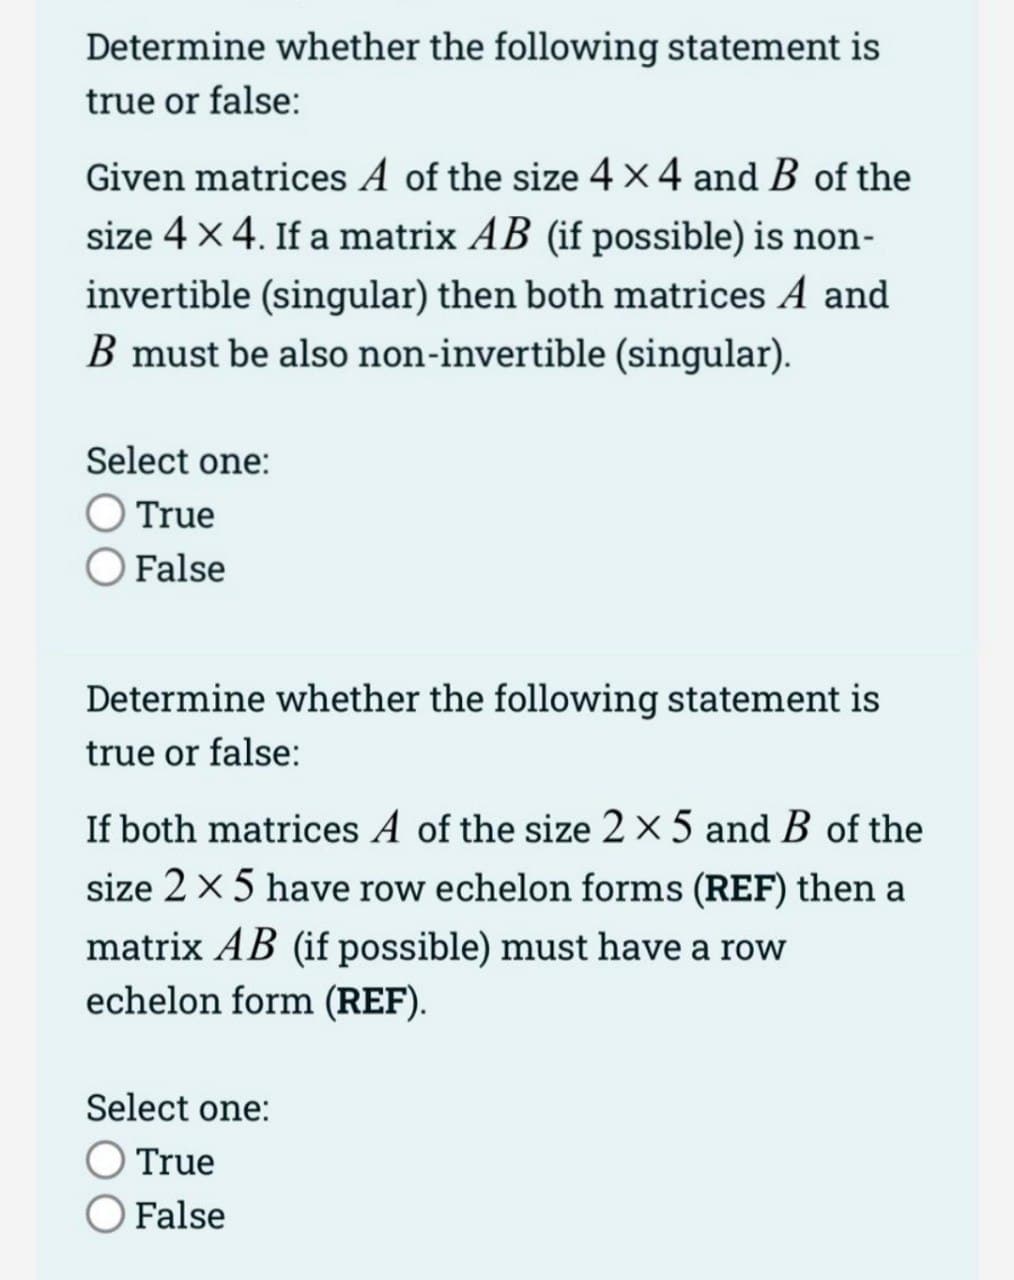 Determine whether the following statement is
true or false:
Given matrices A of the size 4x4 and B of the
size 4 x 4. If a matrix AB (if possible) is non-
invertible (singular) then both matrices A and
B must be also non-invertible (singular).
Select one:
O True
O False
Determine whether the following statement is
true or false:
If both matrices A of the size 2 x 5 and B of the
size 2 x 5 have row echelon forms (REF) then a
matrix AB (if possible) must have a row
echelon form (REF).
Select one:
True
False